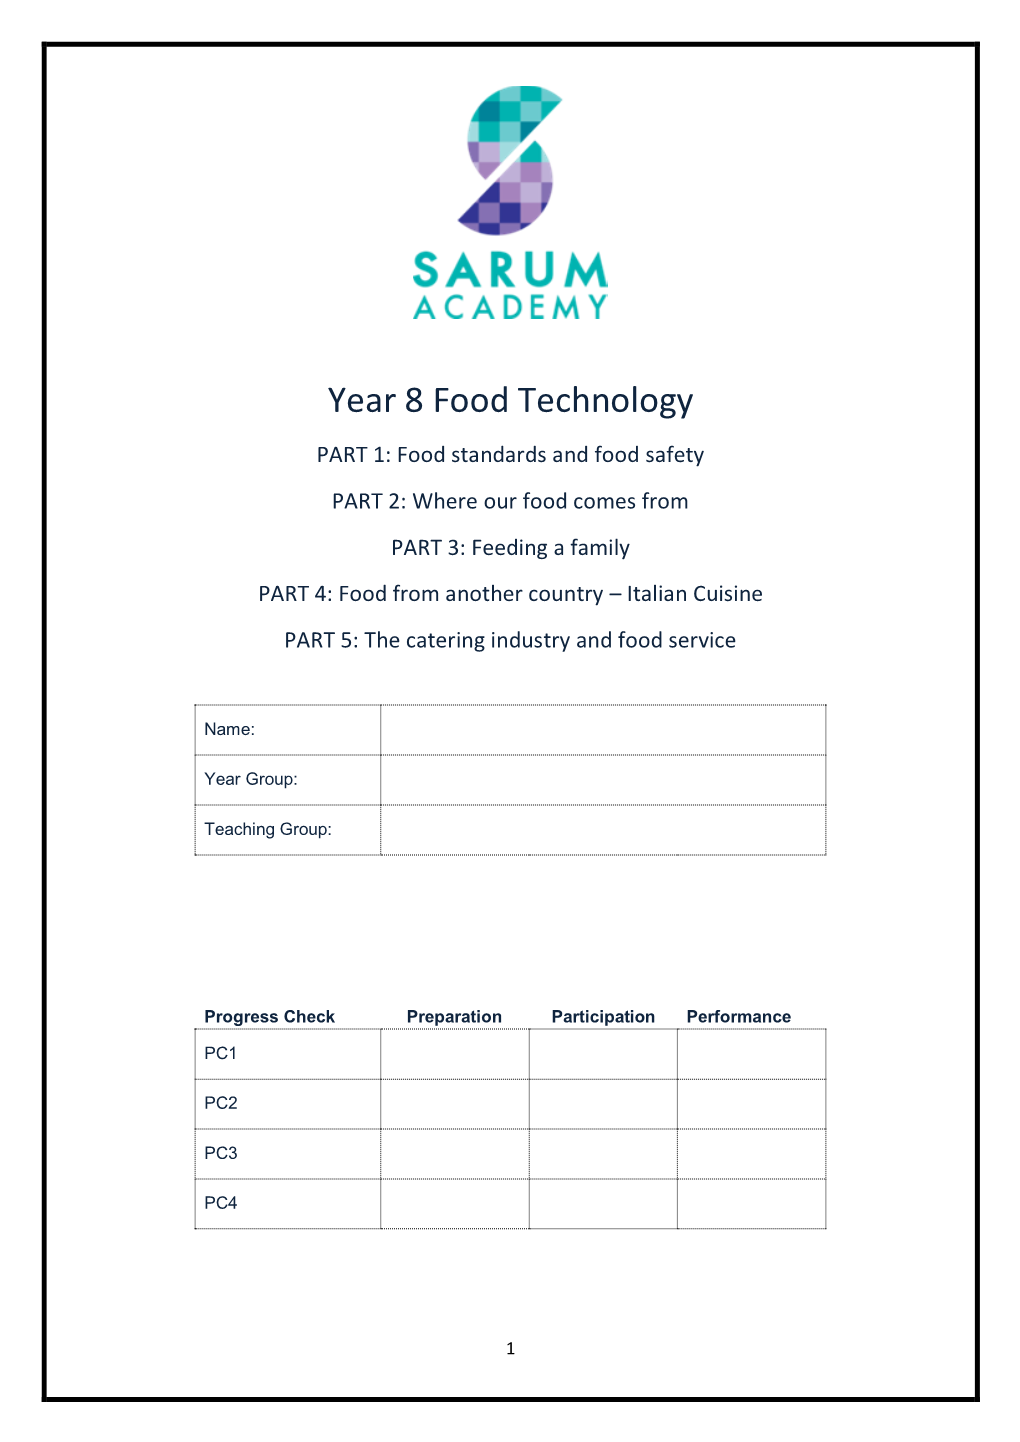 Year 8 Food Technology Remote Learning